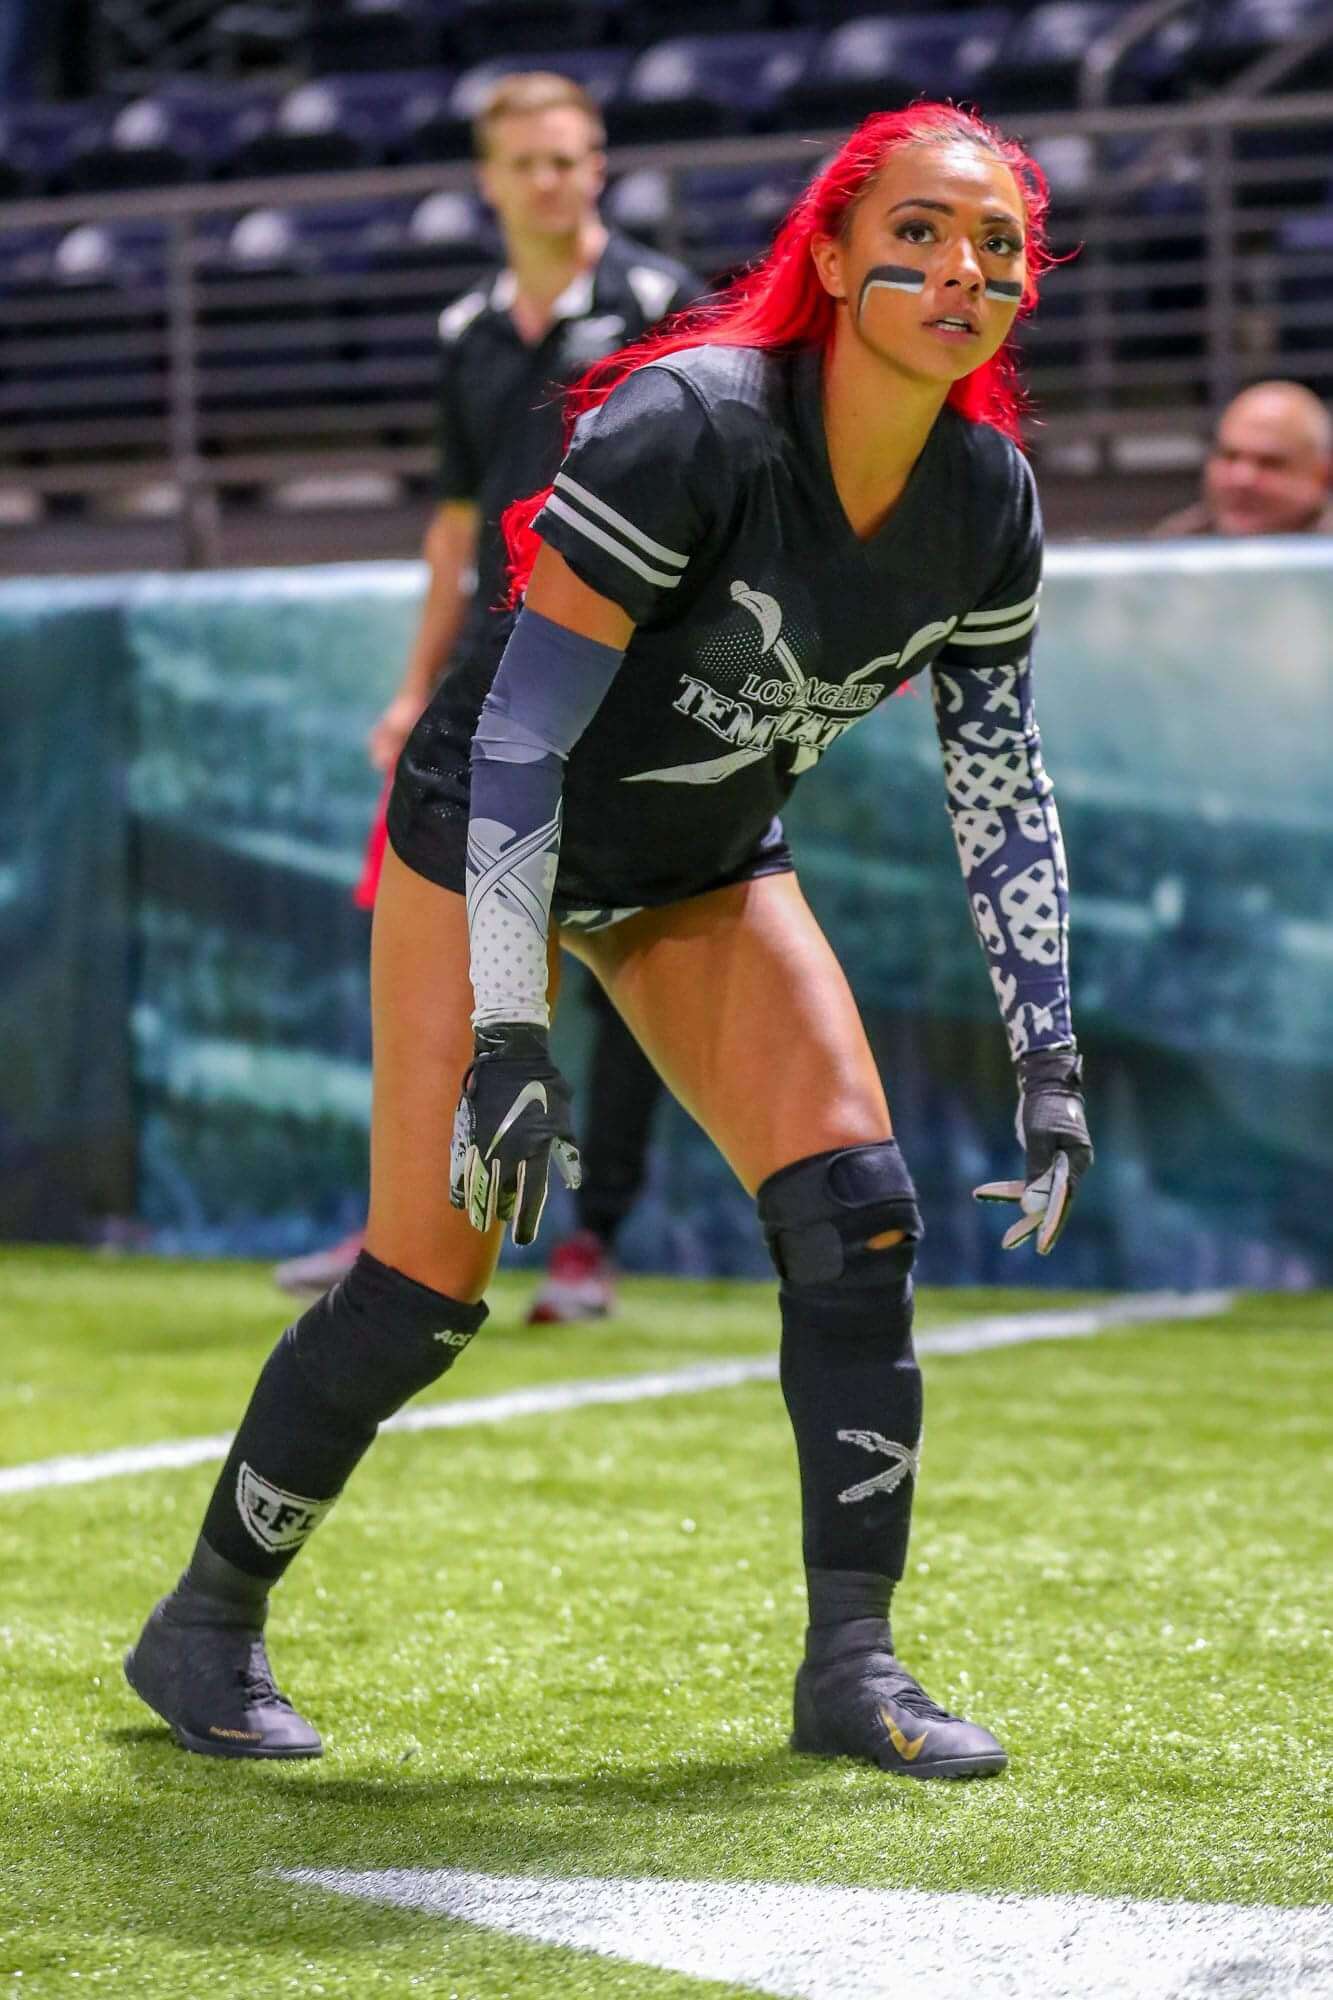 The Legends Football League Beautiful Women And Football, Need We Say Anymore! 50